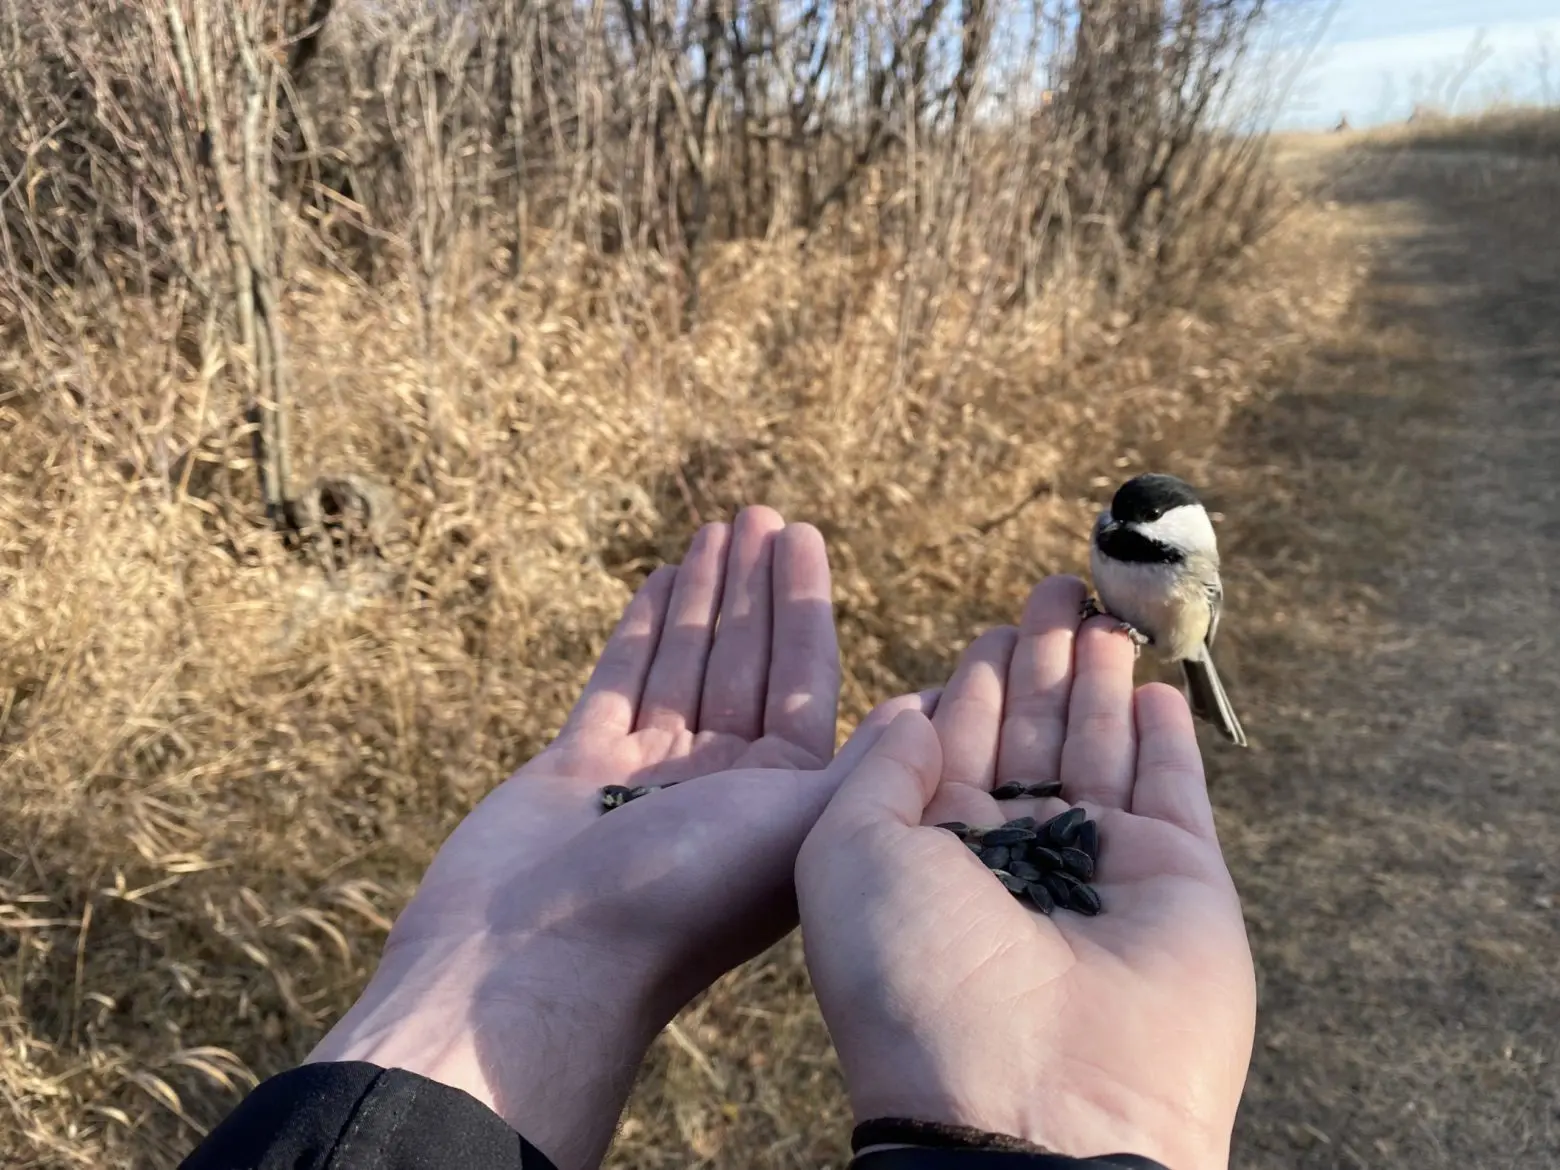 Taryn holding a chickadee during her nature walk.